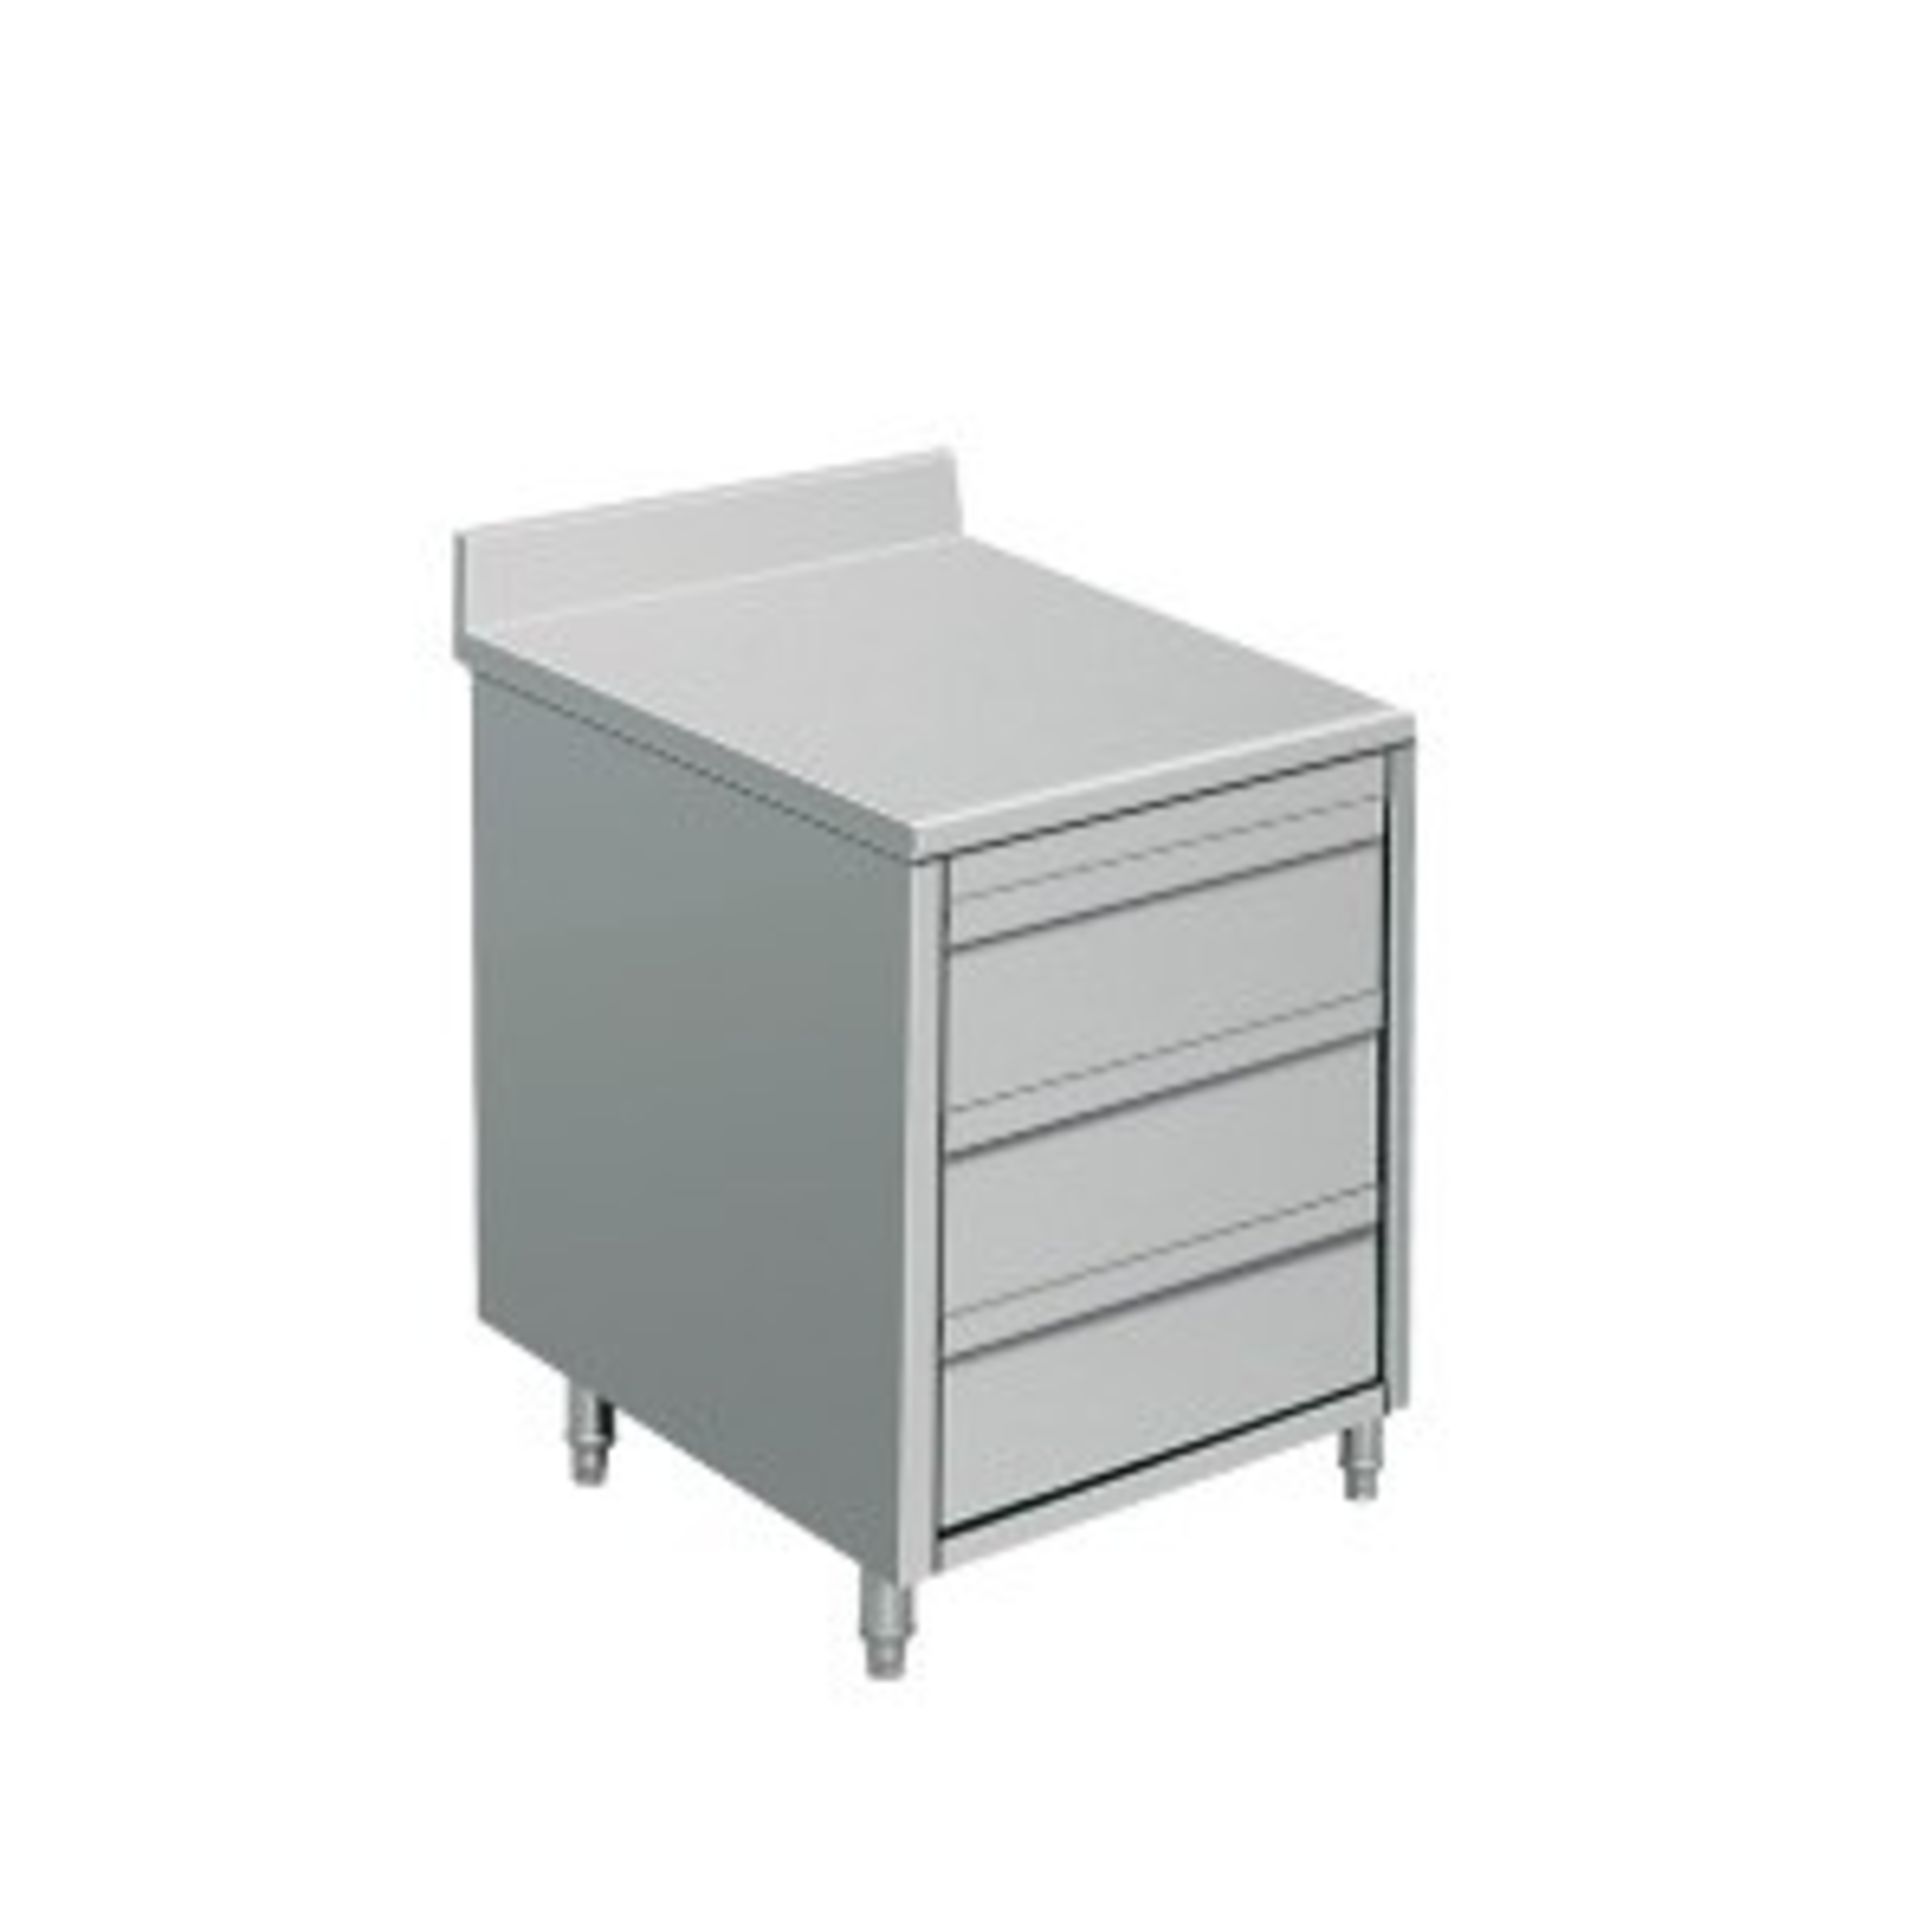 Drawer Cabinet with Back Model#:THSS3557 L*W*H (inch):19.7*27.6*37.5 Weight (lb)60